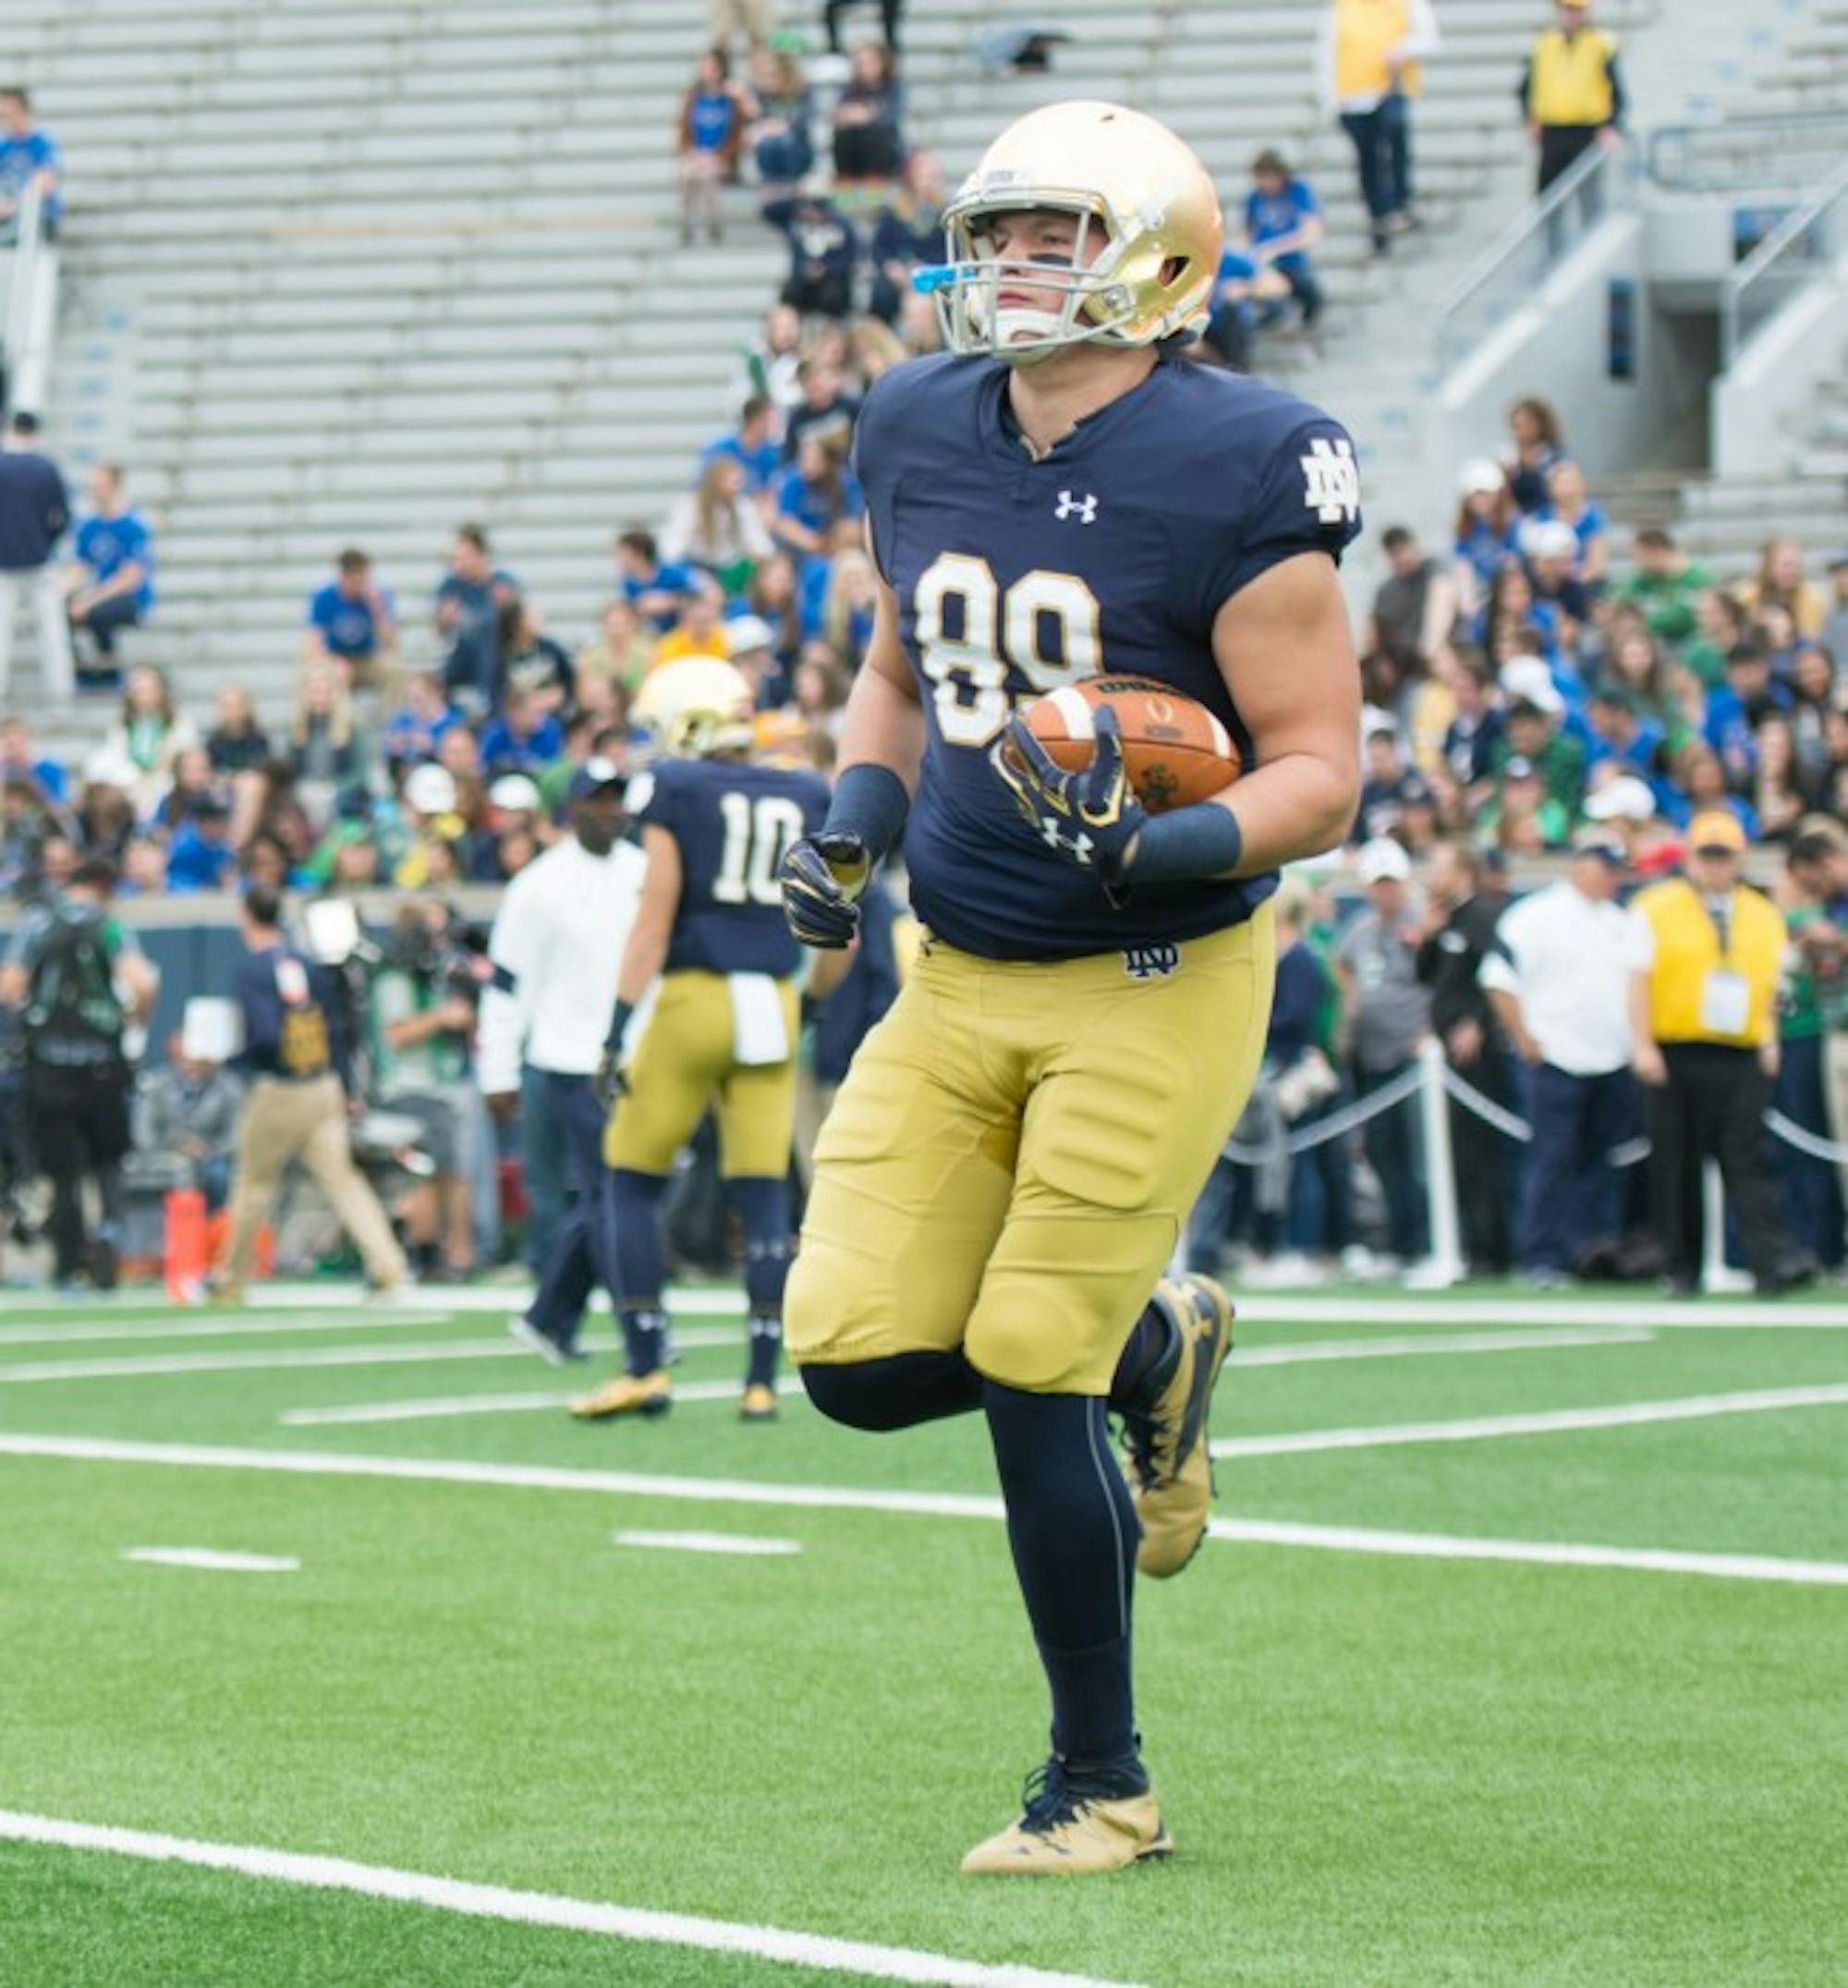 Irish senior tight end Jacob Matuska catches a ball during warm ups before Notre Dame’s victory over Miami at Notre Dame Stadium.